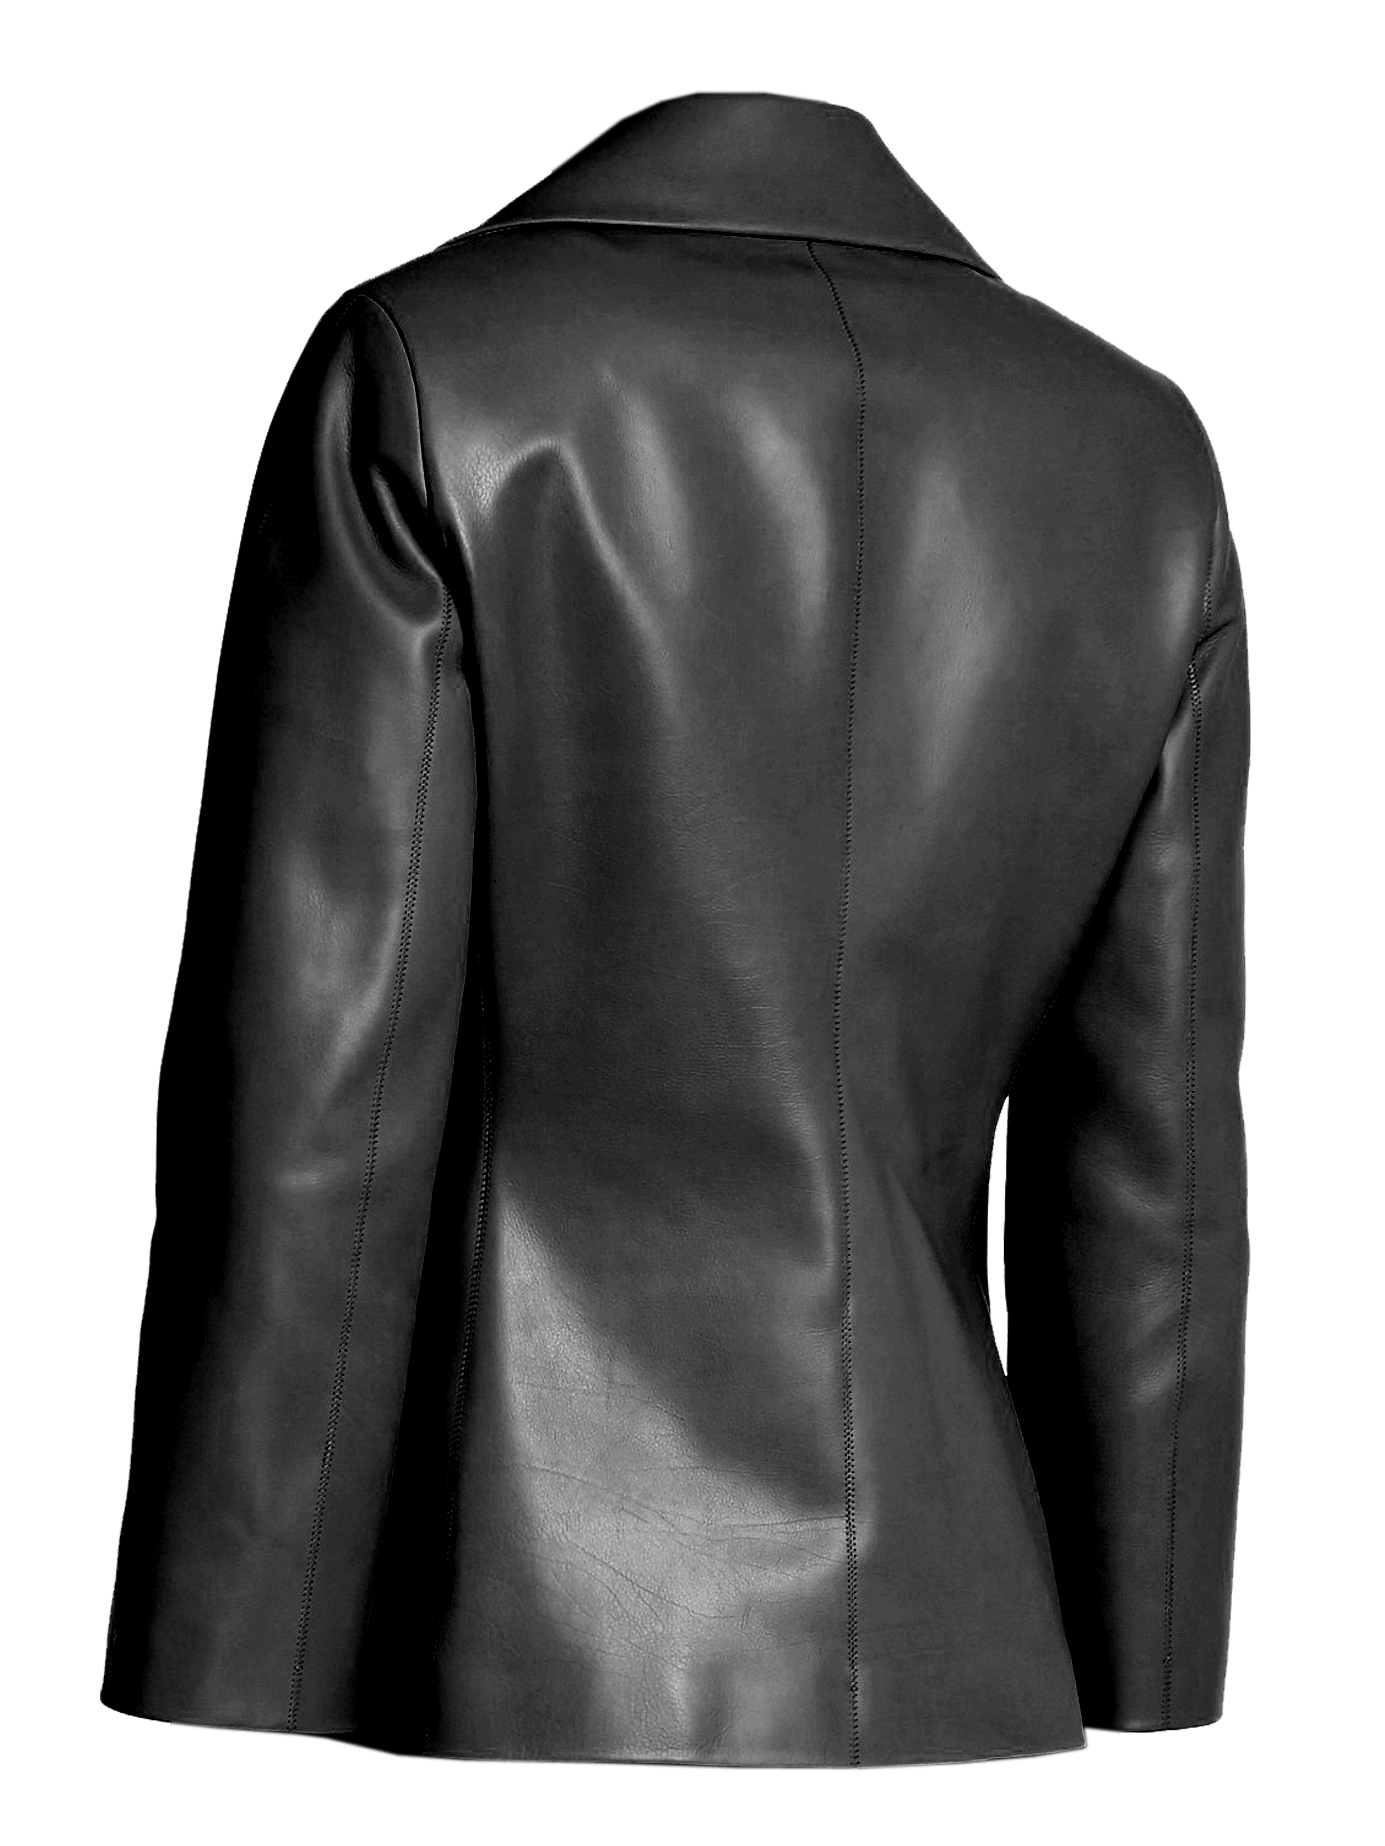 VearFit Simple Coat Black Faux Leather Blazer Smooth Fashion Designer Collection for Women